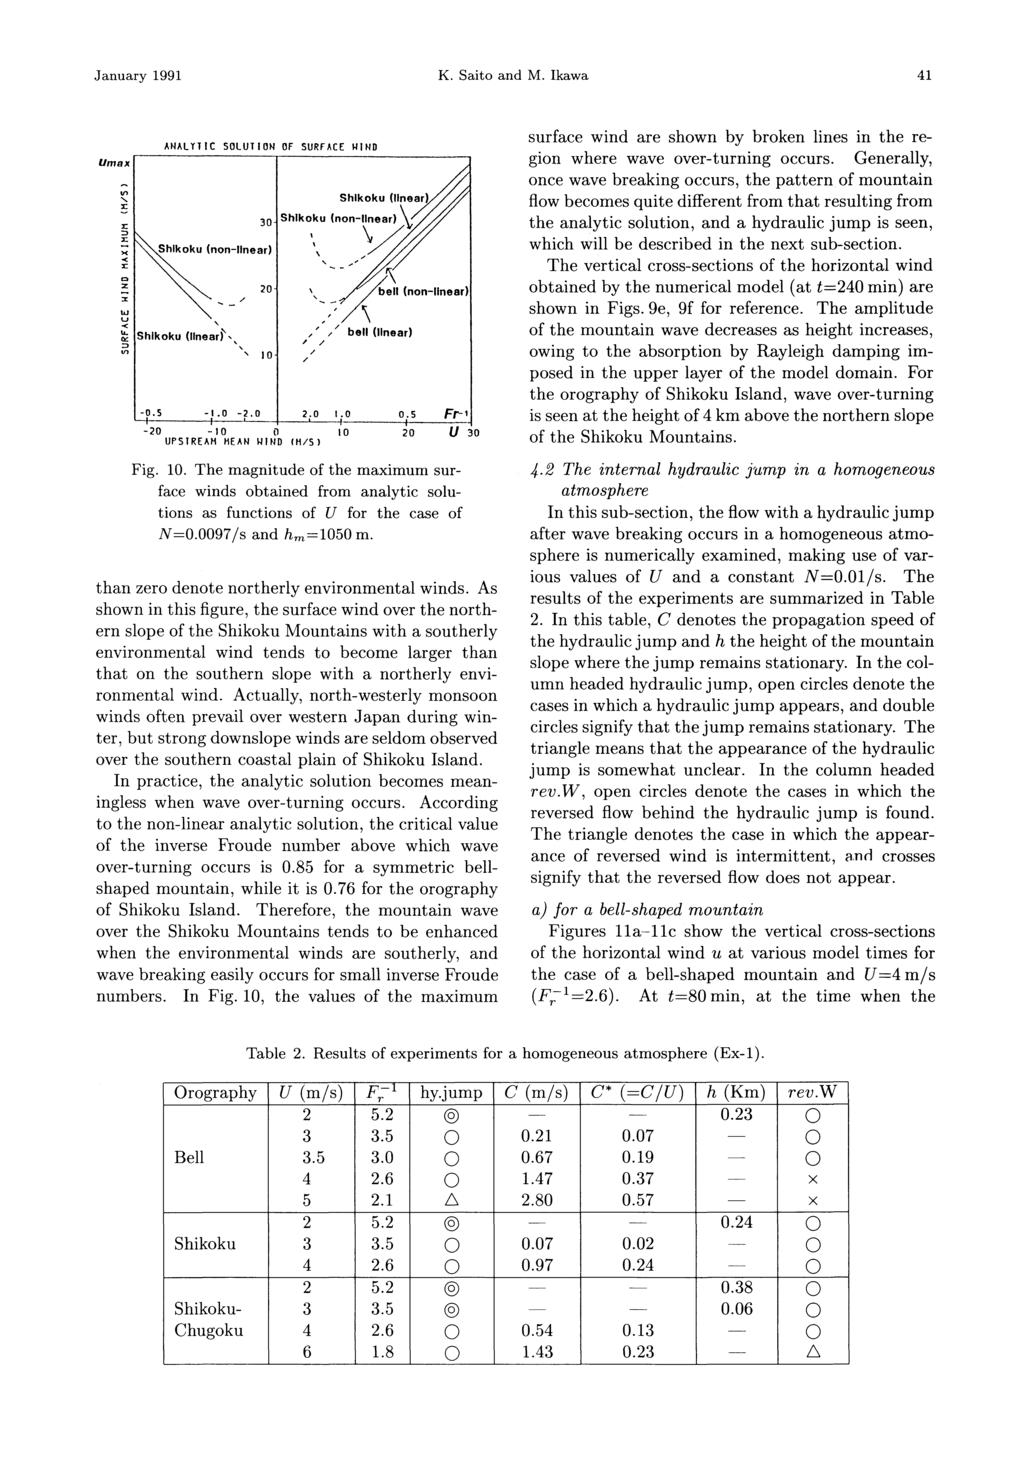 January 1991 K. Saito and M. Ikawa 41 Fig. 10. The magnitude of the maximum surface winds obtained from analytic solutions as functions of U for the case of N=0.0097/s and hm=1050 m.